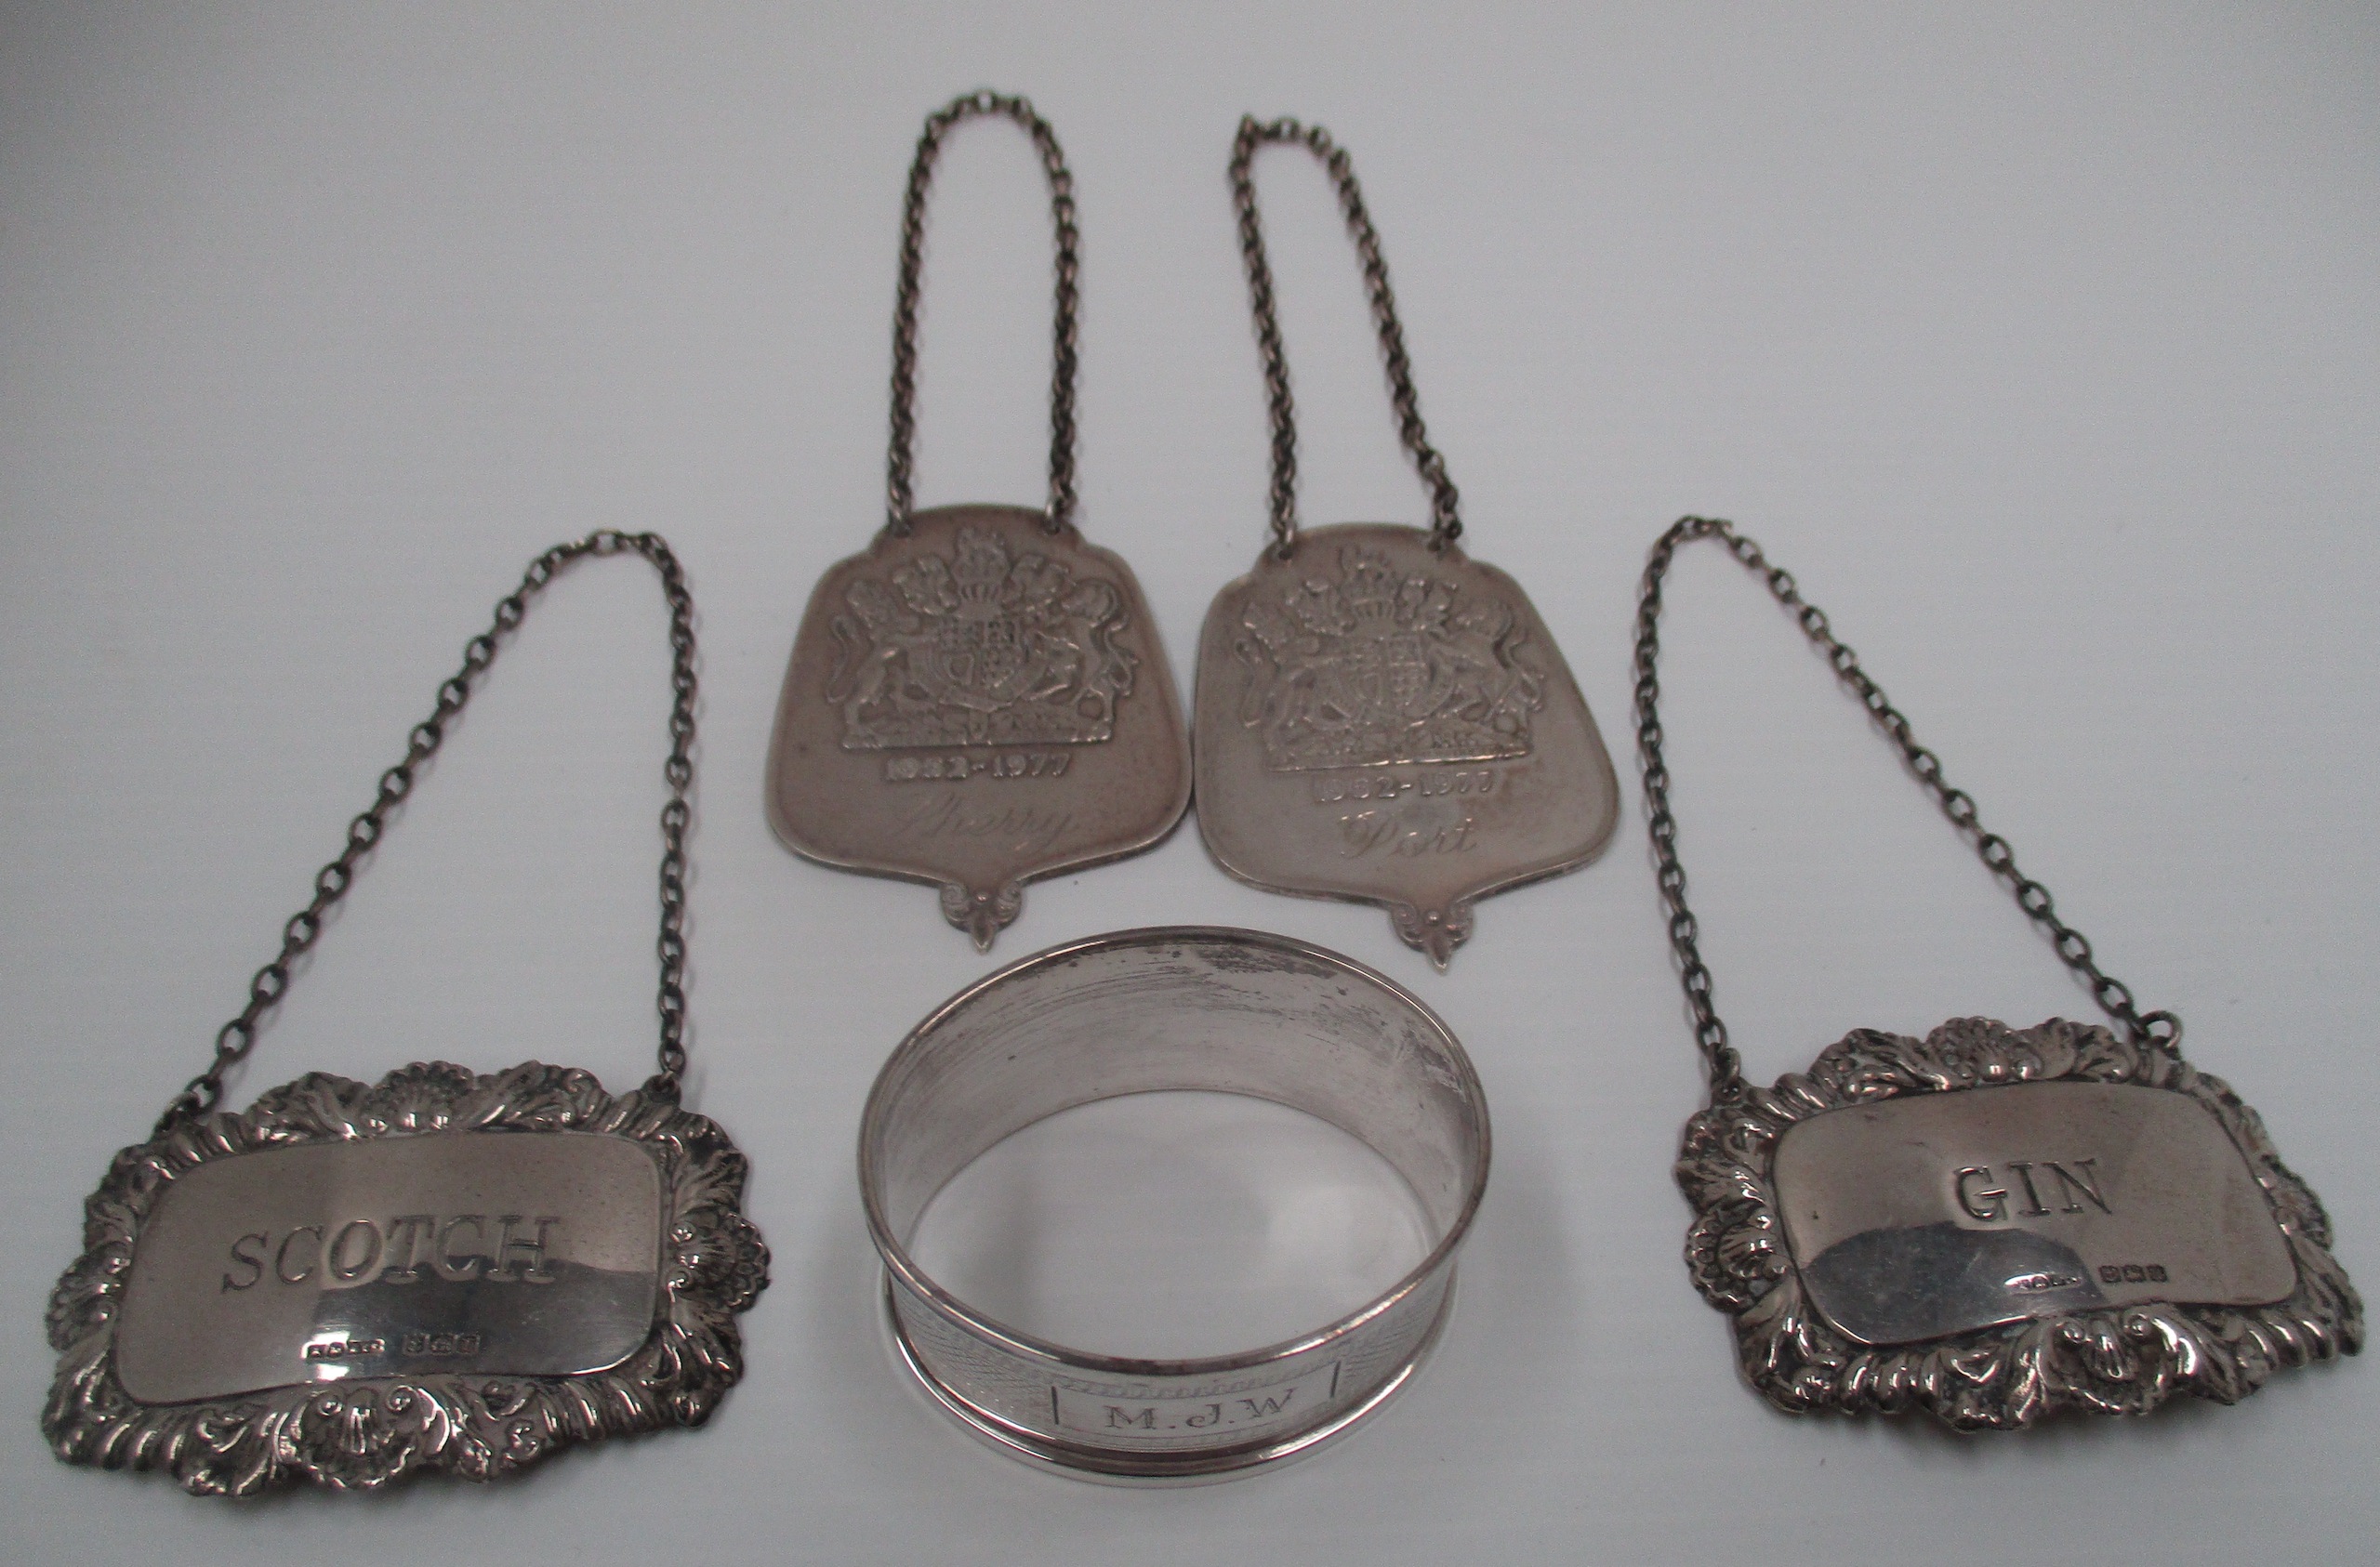 A pair of Silver Jubilee [1977] silver decanter labels cast with the Royal Coat of Arms,